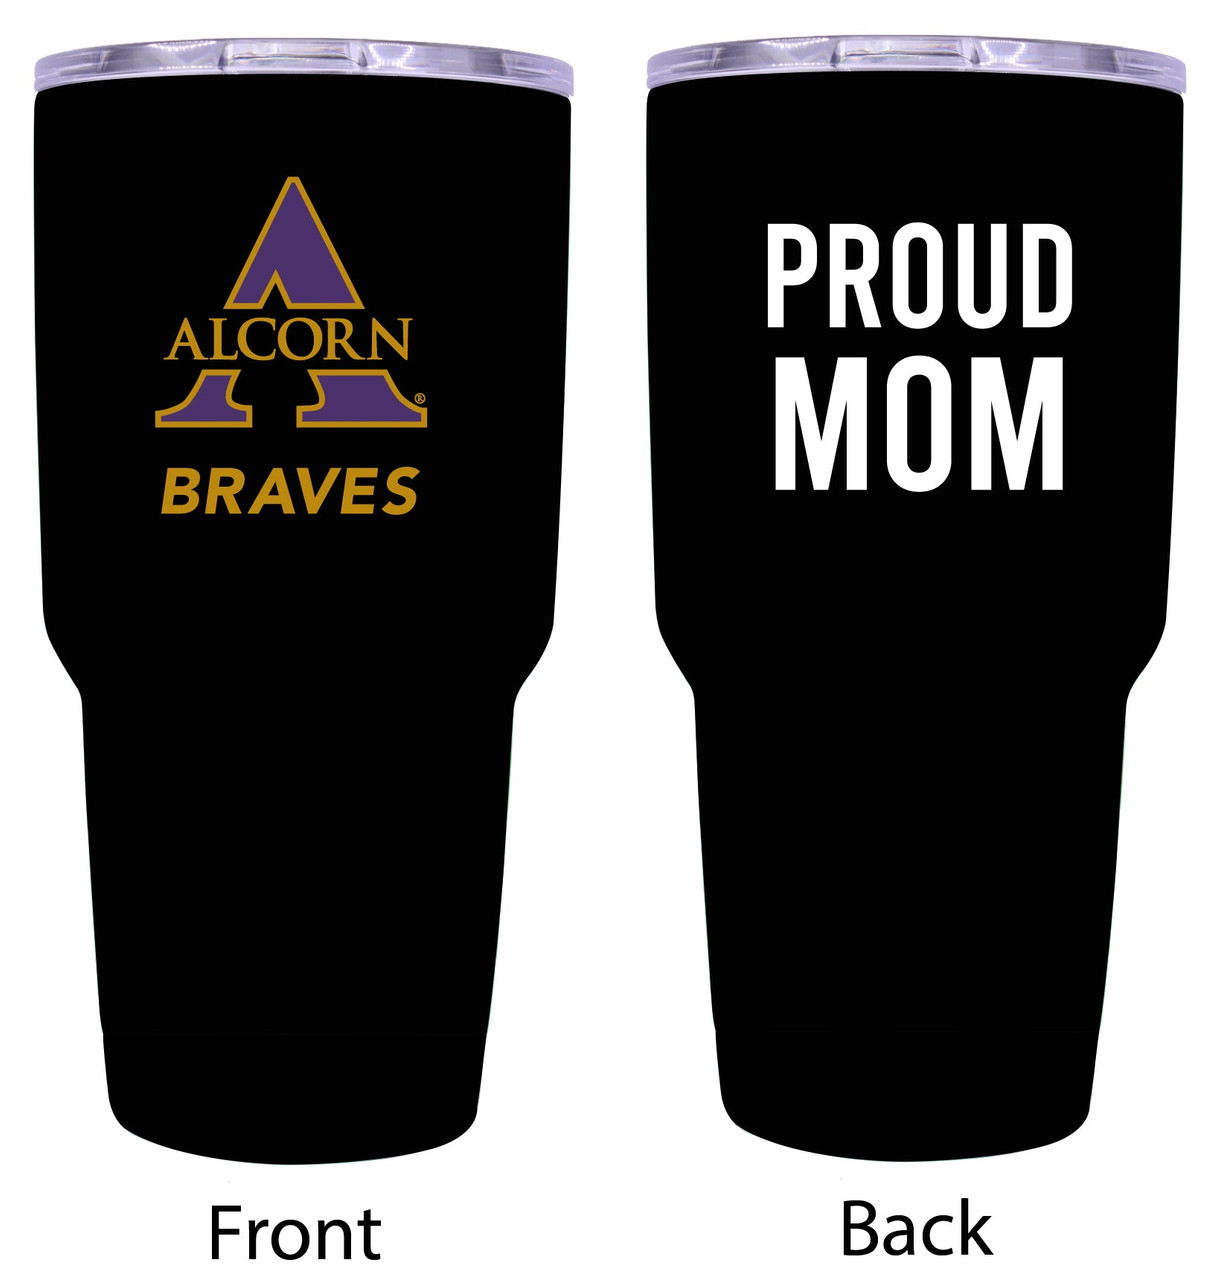 Alcorn State Braves Proud Mom 24 oz Insulated Stainless Steel Tumblers Black.